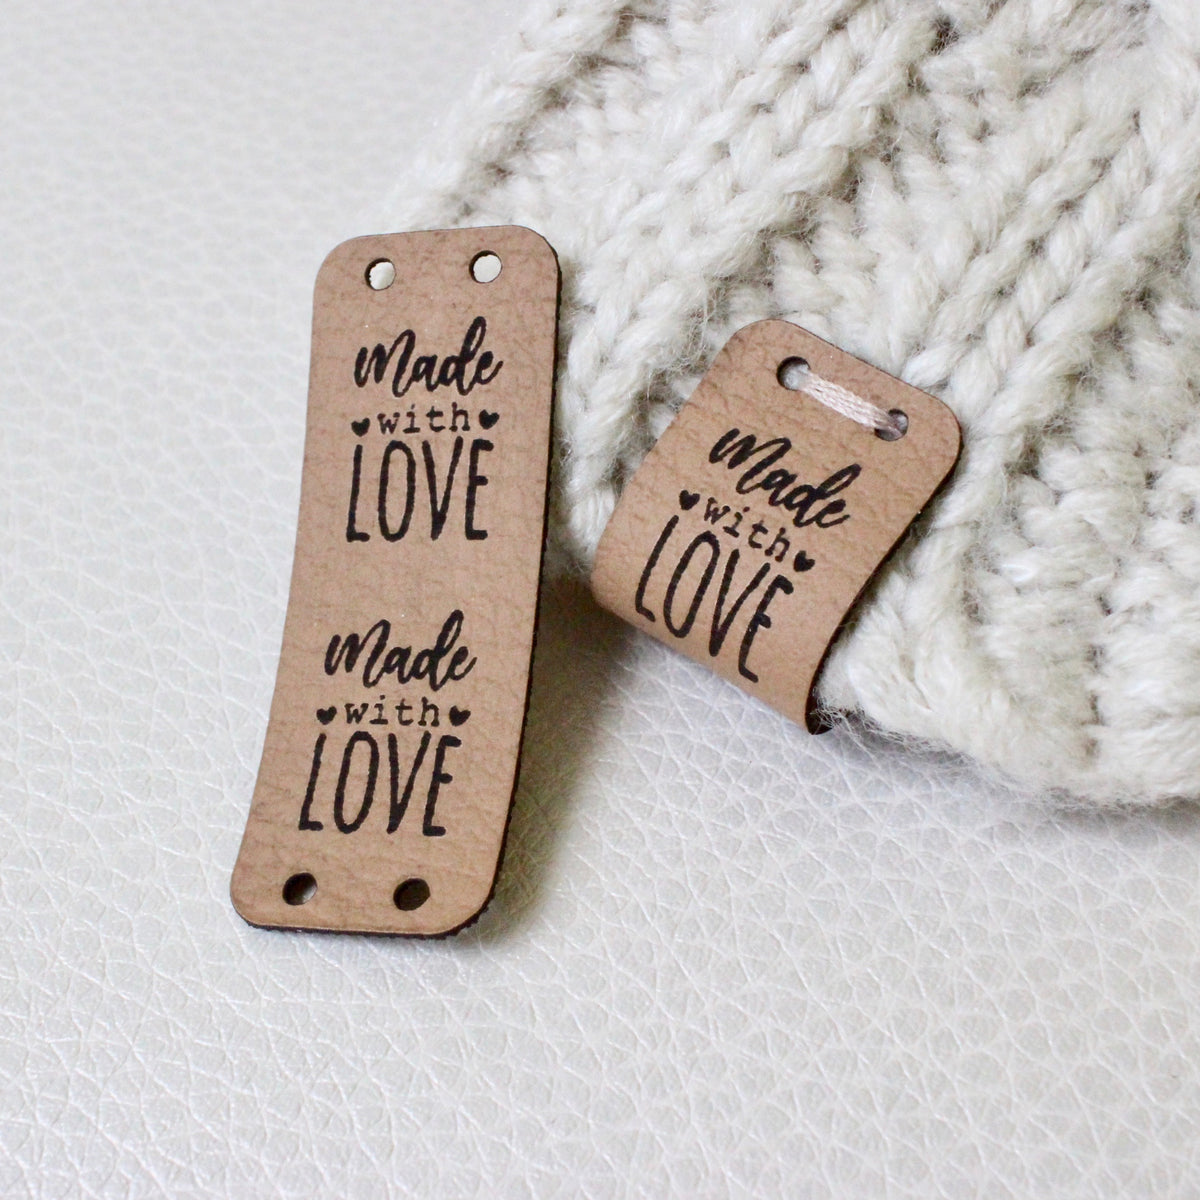 Heart Fold Over Leather Label Handmade with Love mod. P - Knit or Crochet  Leather Tags for Handmade Items (Standard Text - 15 Pieces)